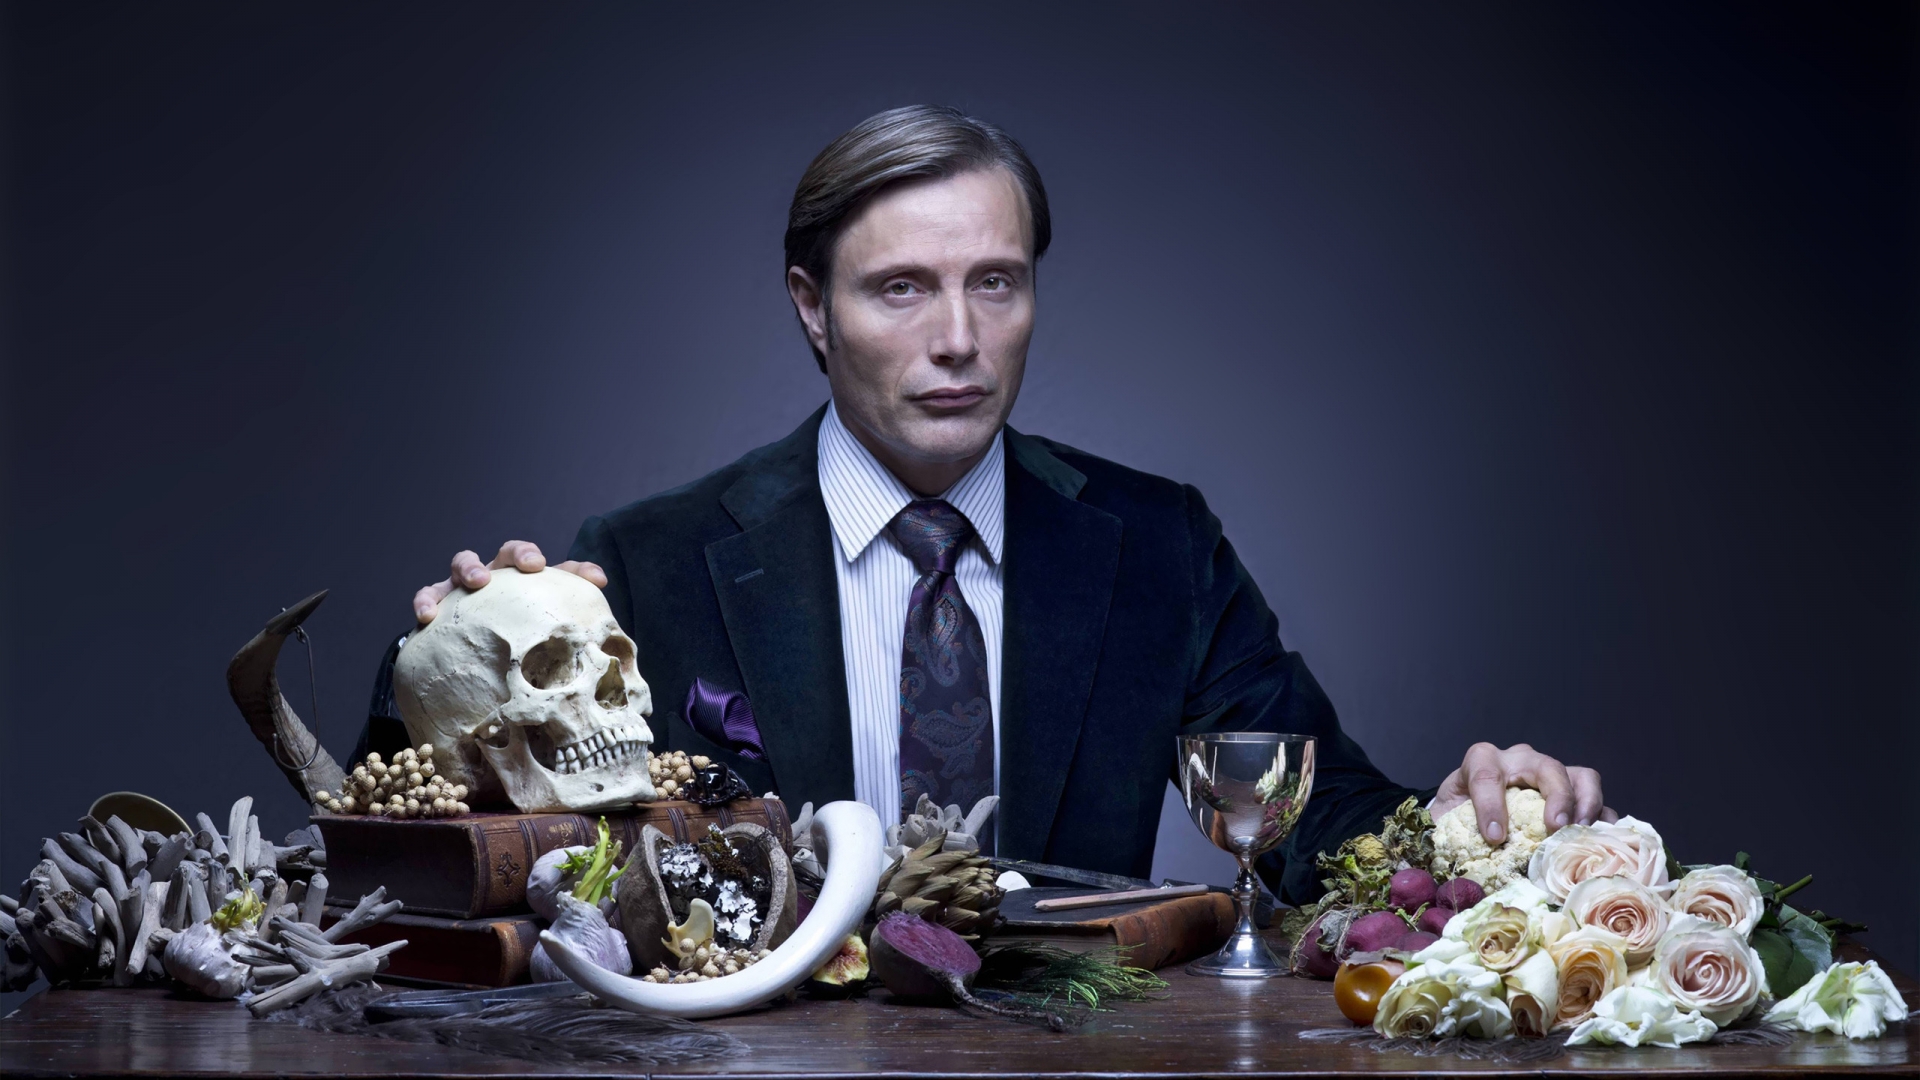 Dr Hannibal Lecter for 1920 x 1080 HDTV 1080p resolution